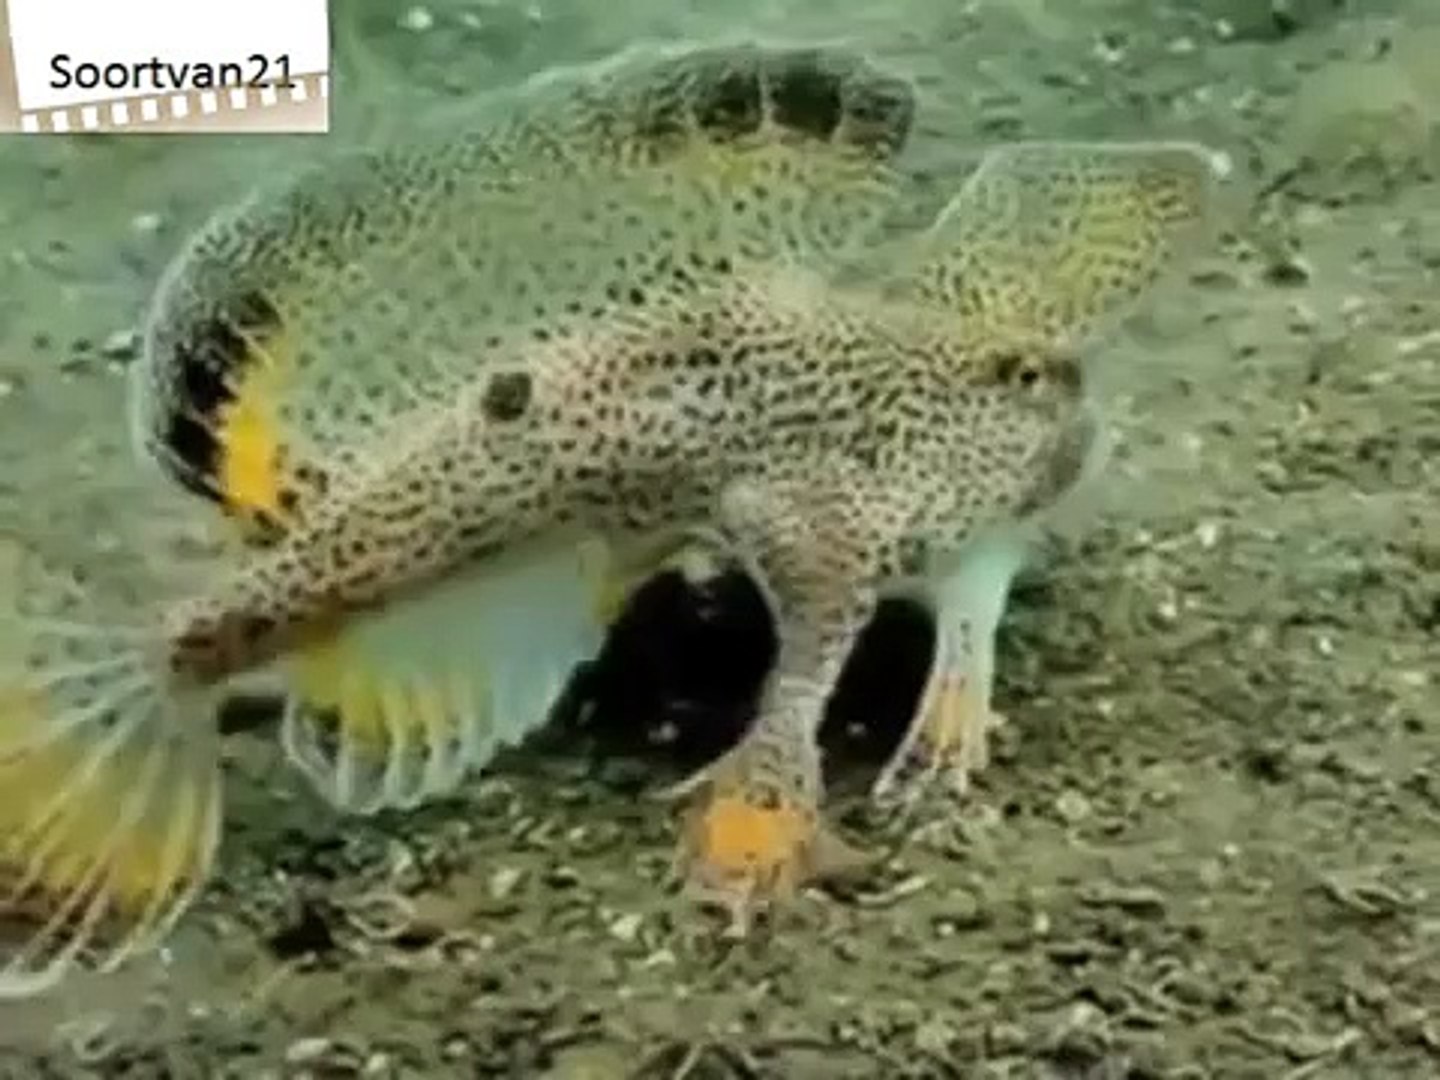 fish with legs and arms